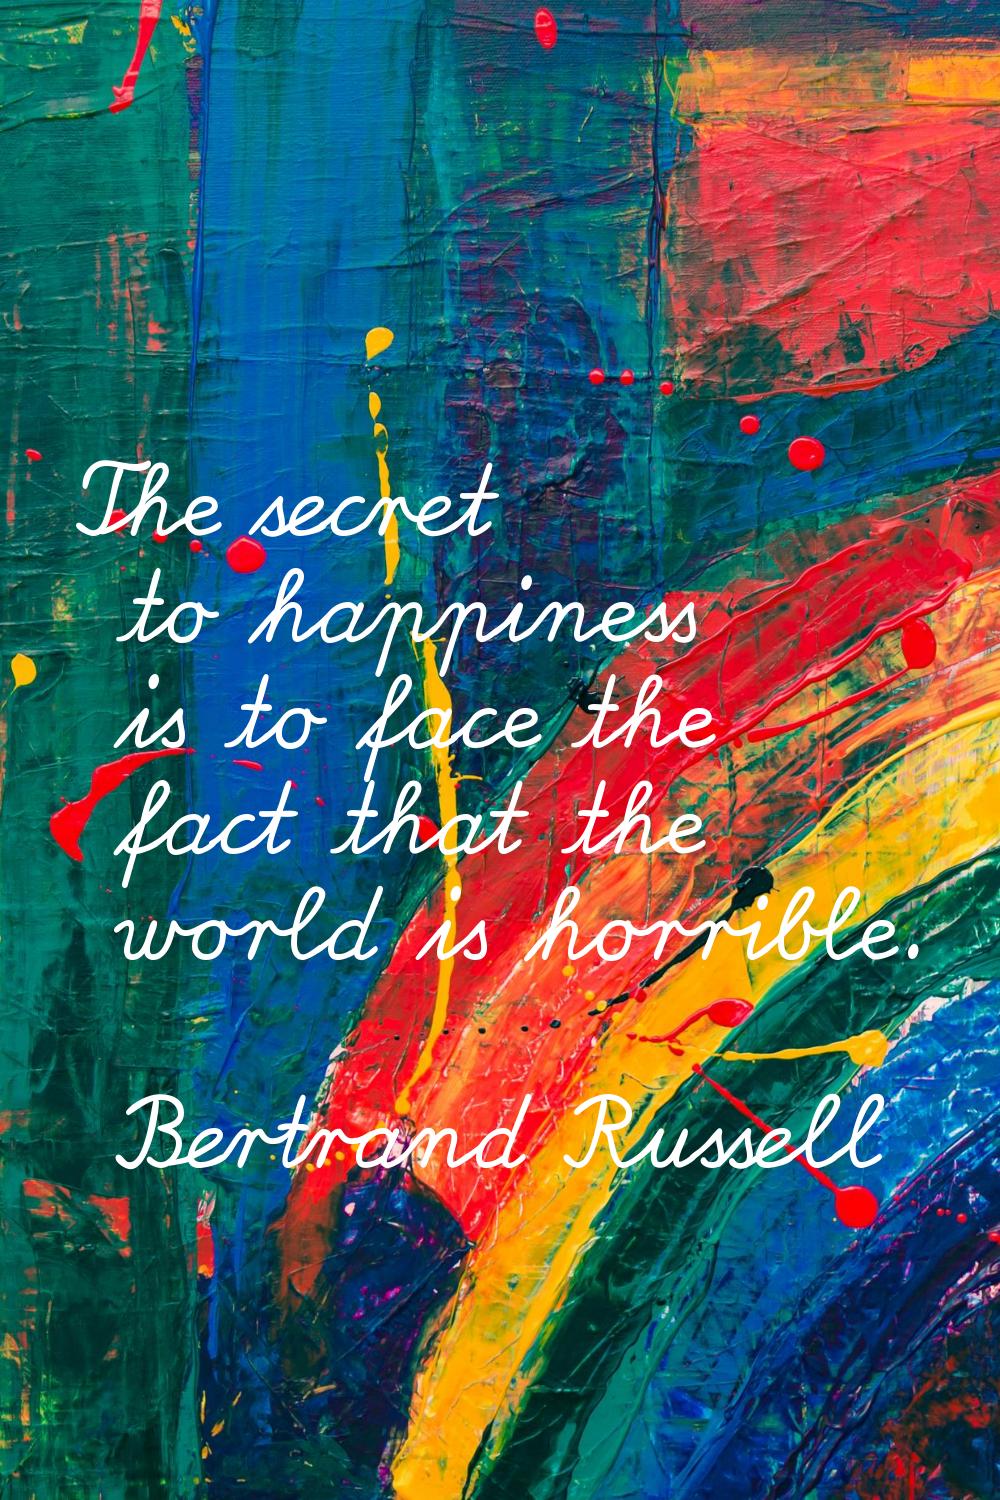 The secret to happiness is to face the fact that the world is horrible.